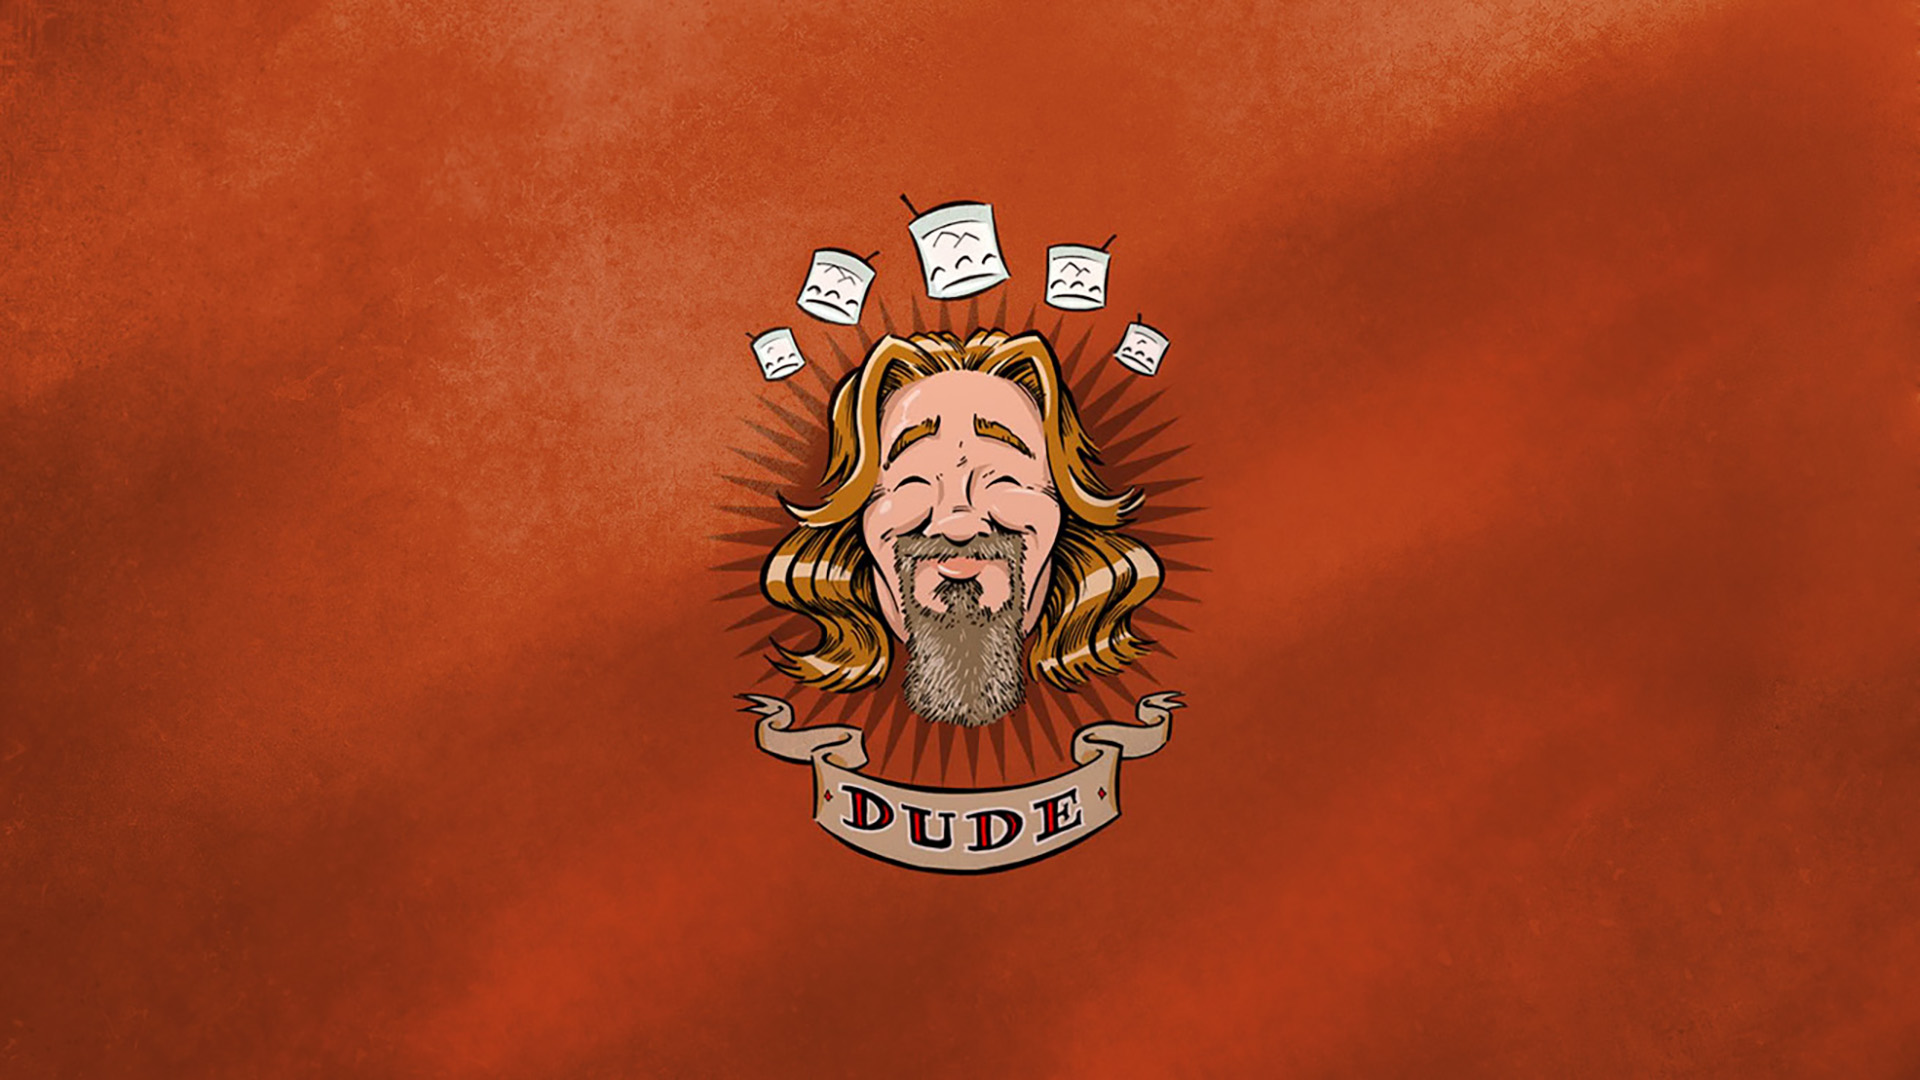 General 1920x1080 The Big Lebowski The Dude movie characters